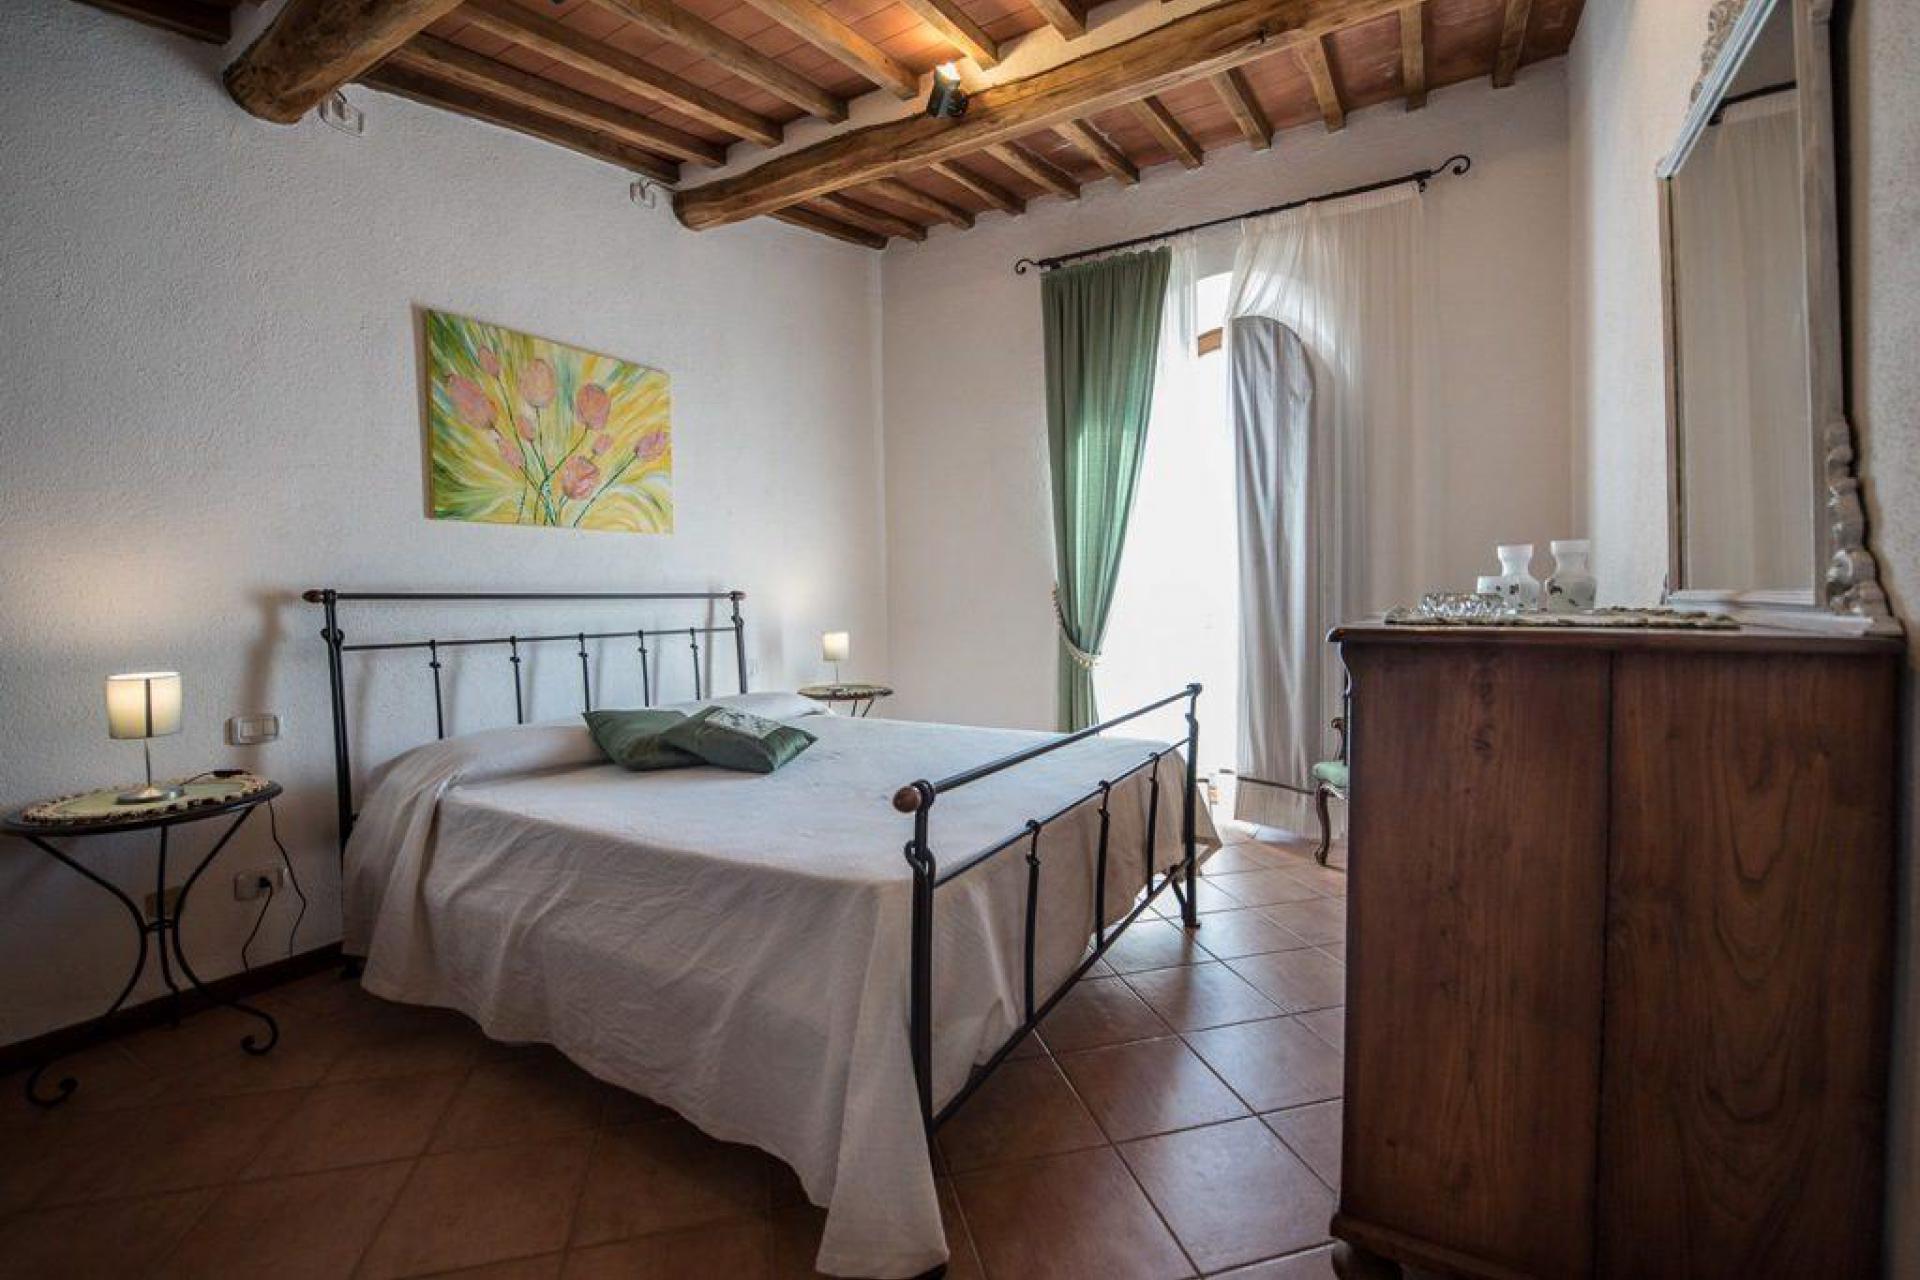 Agriturismo Toscane Agriturismo in voormalig klooster in zuid-Toscane | myitaly.nl